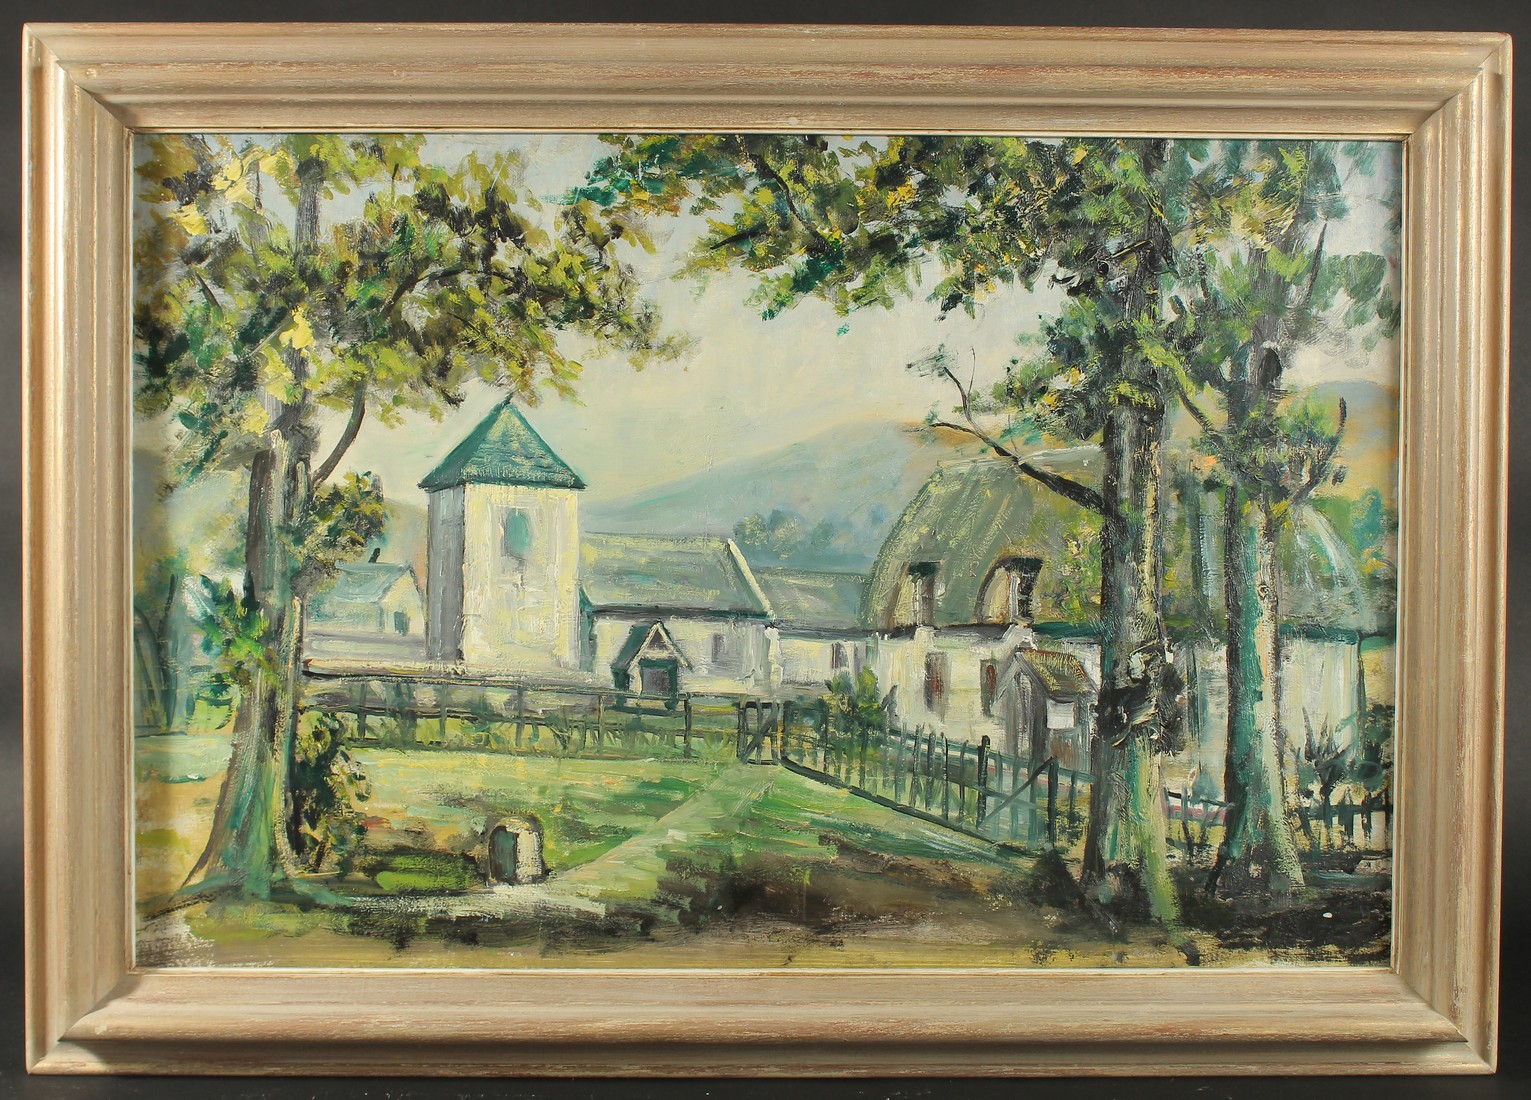 Early 20th Century, A group of buildings, a house next door to a church, oil on board, 20" x 30", (